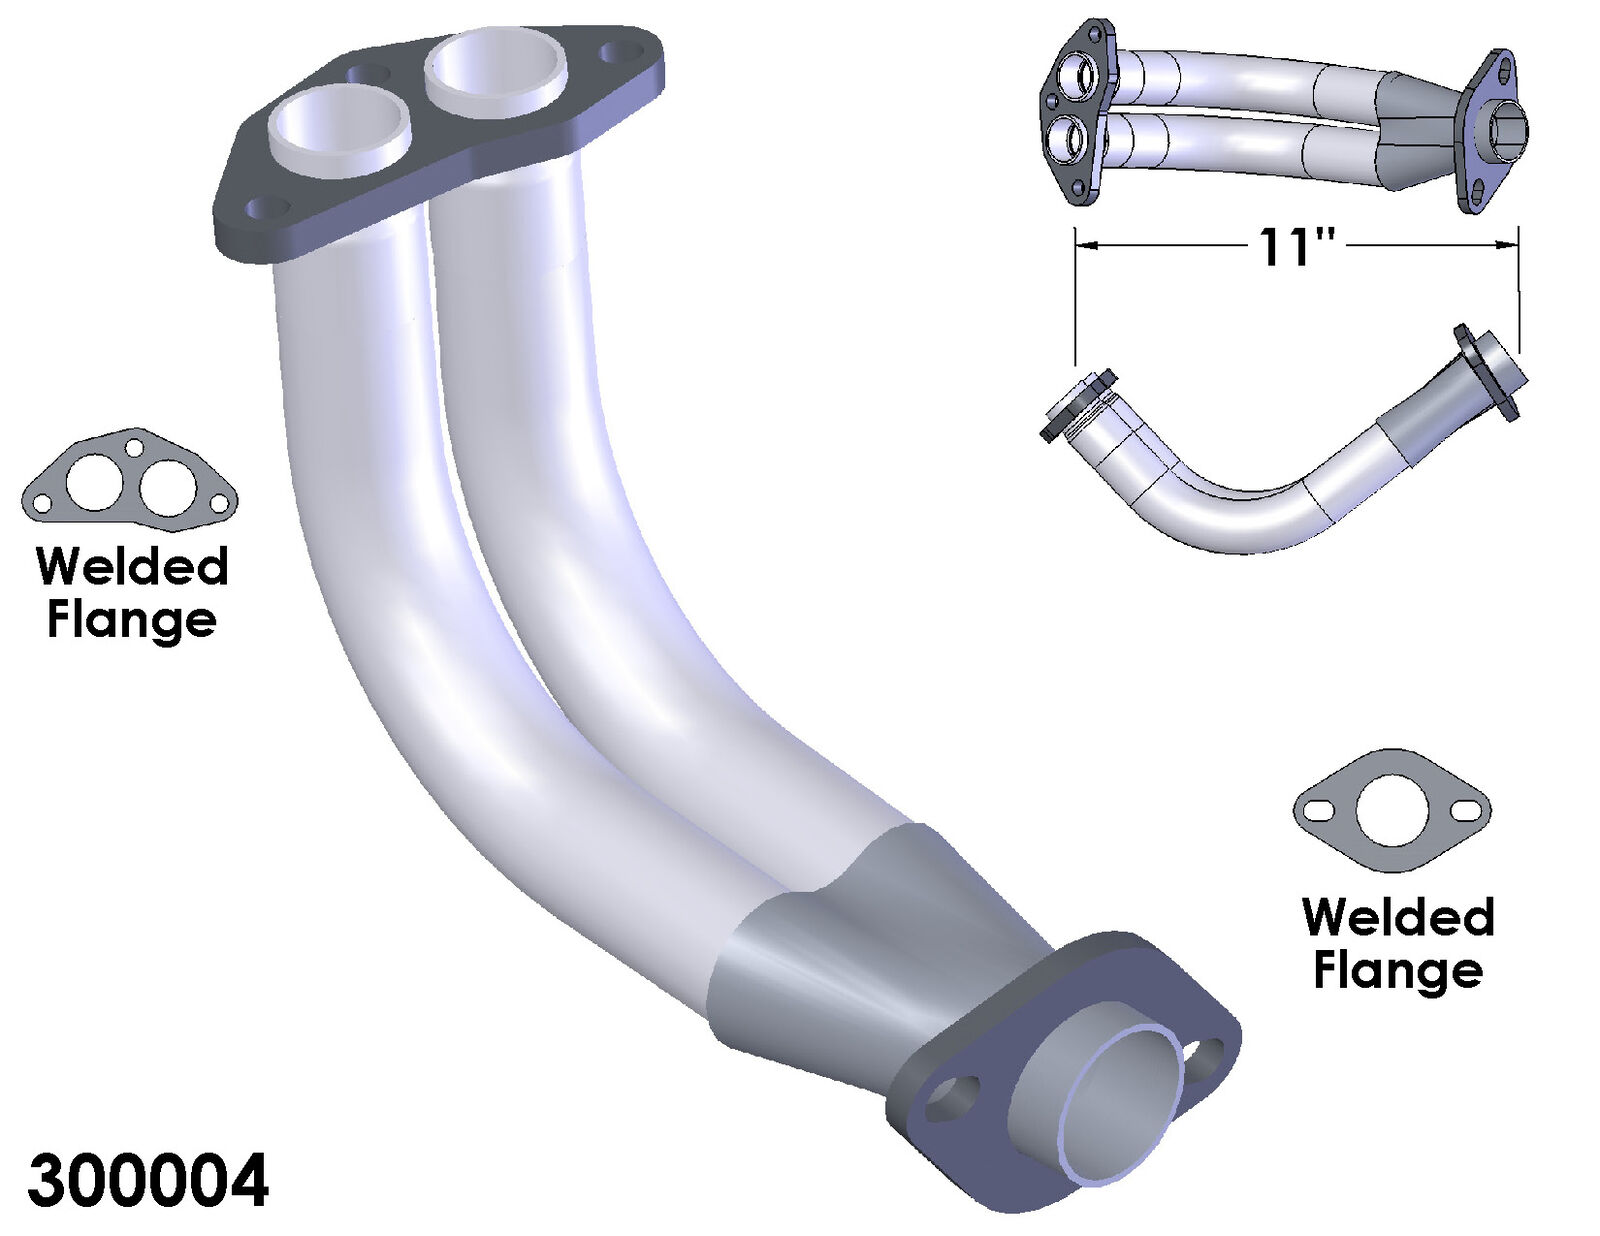 Exhaust and Tail Pipes for 1989-1992 Suzuki Swift